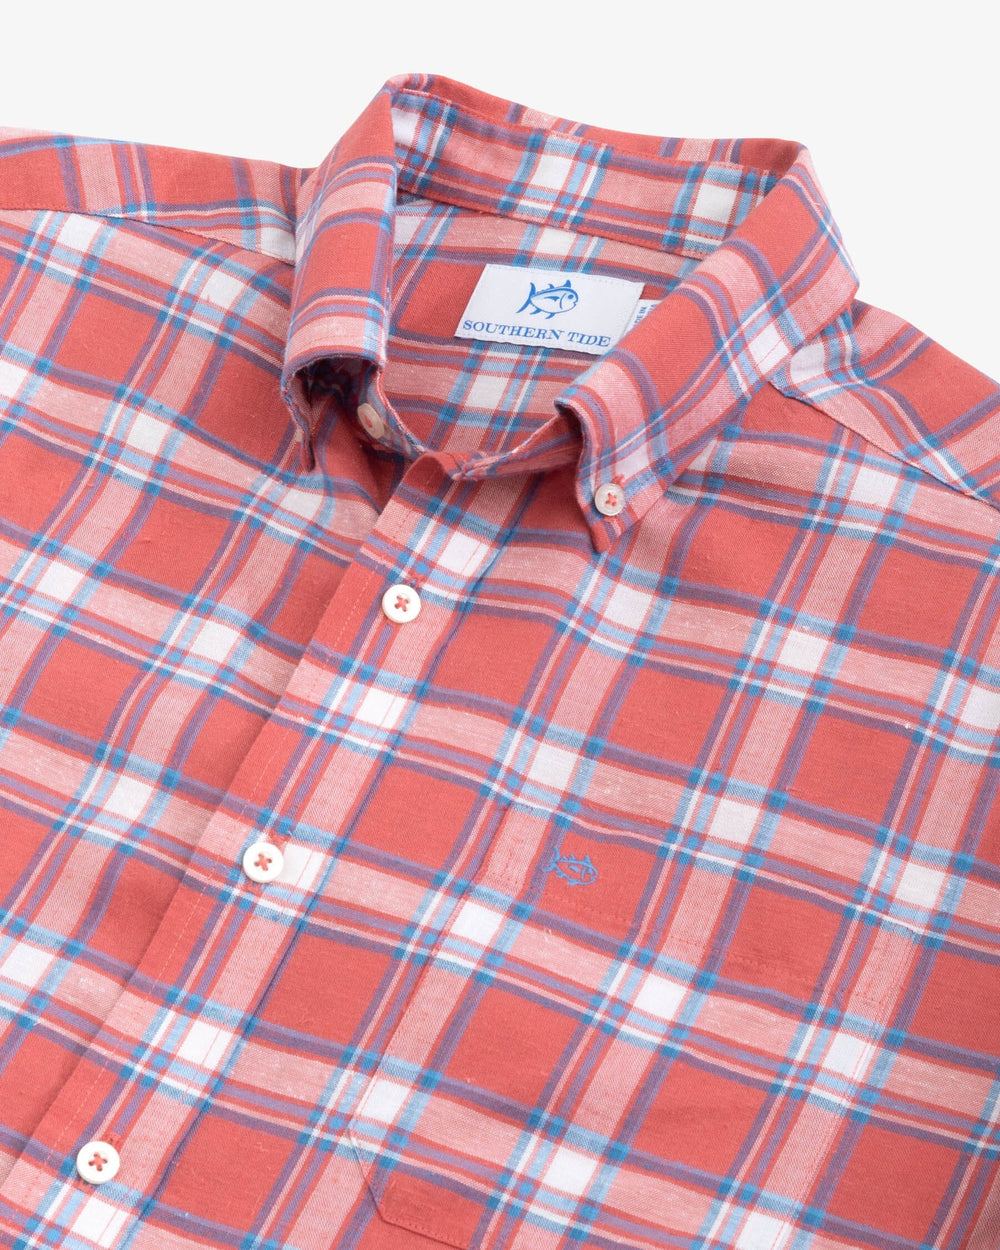 The detail view of the Southern Tide Headland Bayfront Plaid Long Sleeve Buttom Down Sport Shirt - Mineral Red